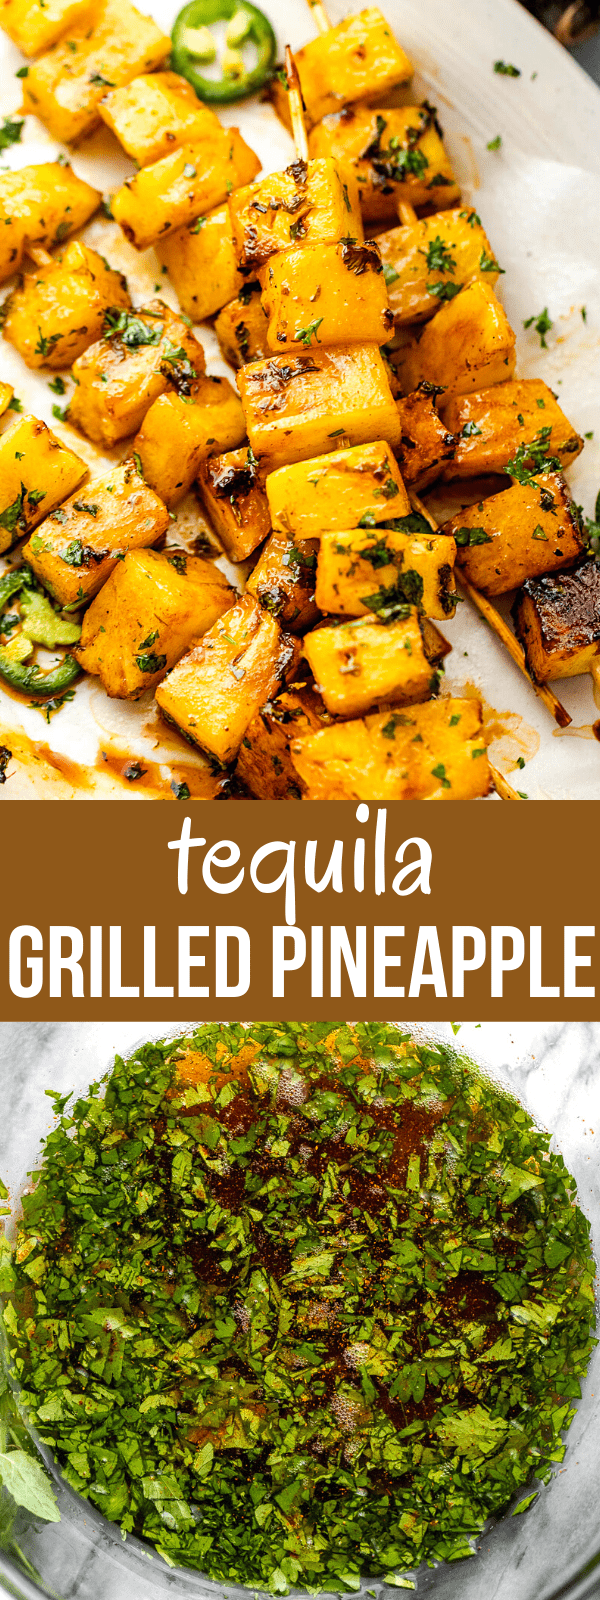 The Best Tequila Grilled Pineapple | Easy Weeknight Recipes